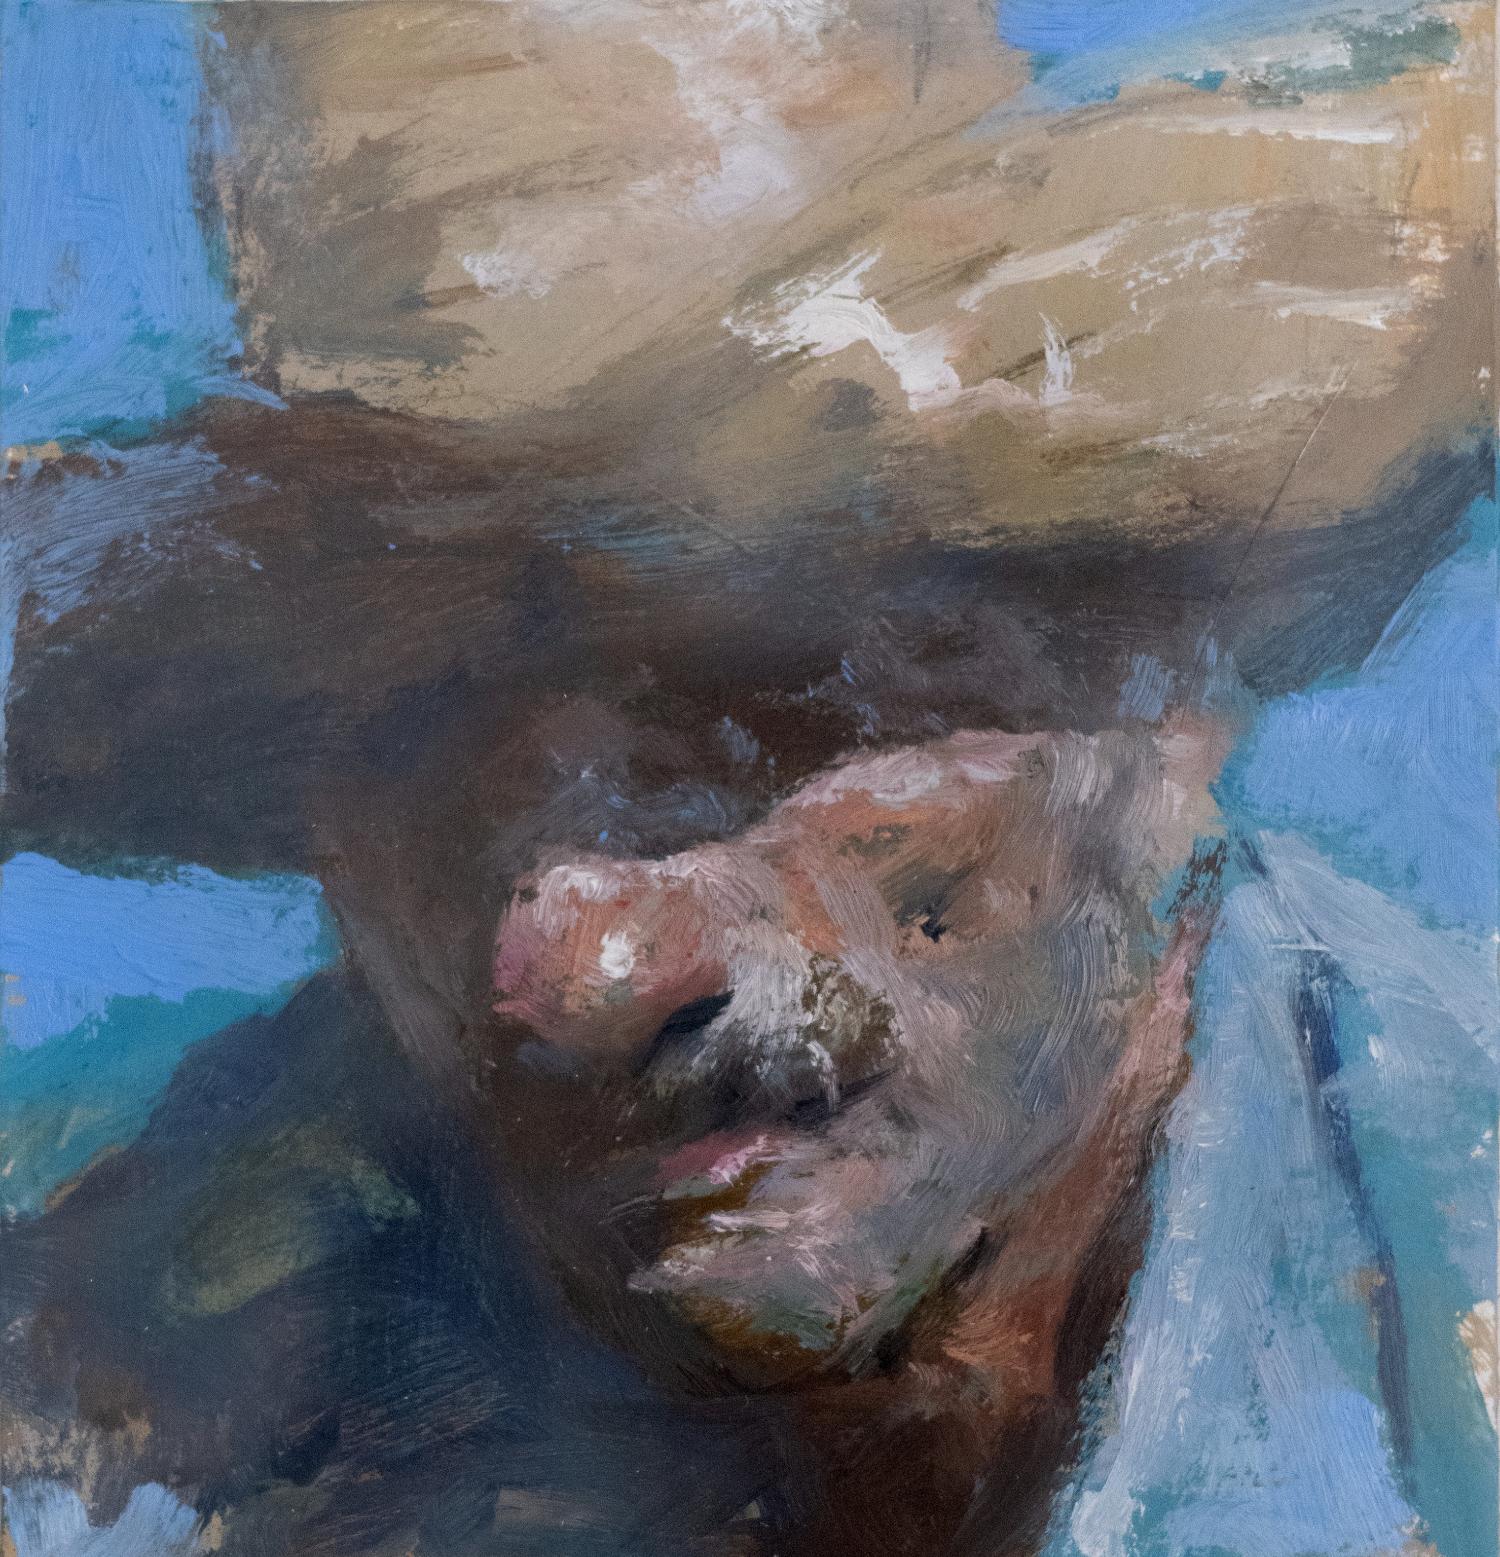 Edgar's Cattle, Portrait Cuban Artist, Museums  and International Collectors. - Painting by Reynier Llanes